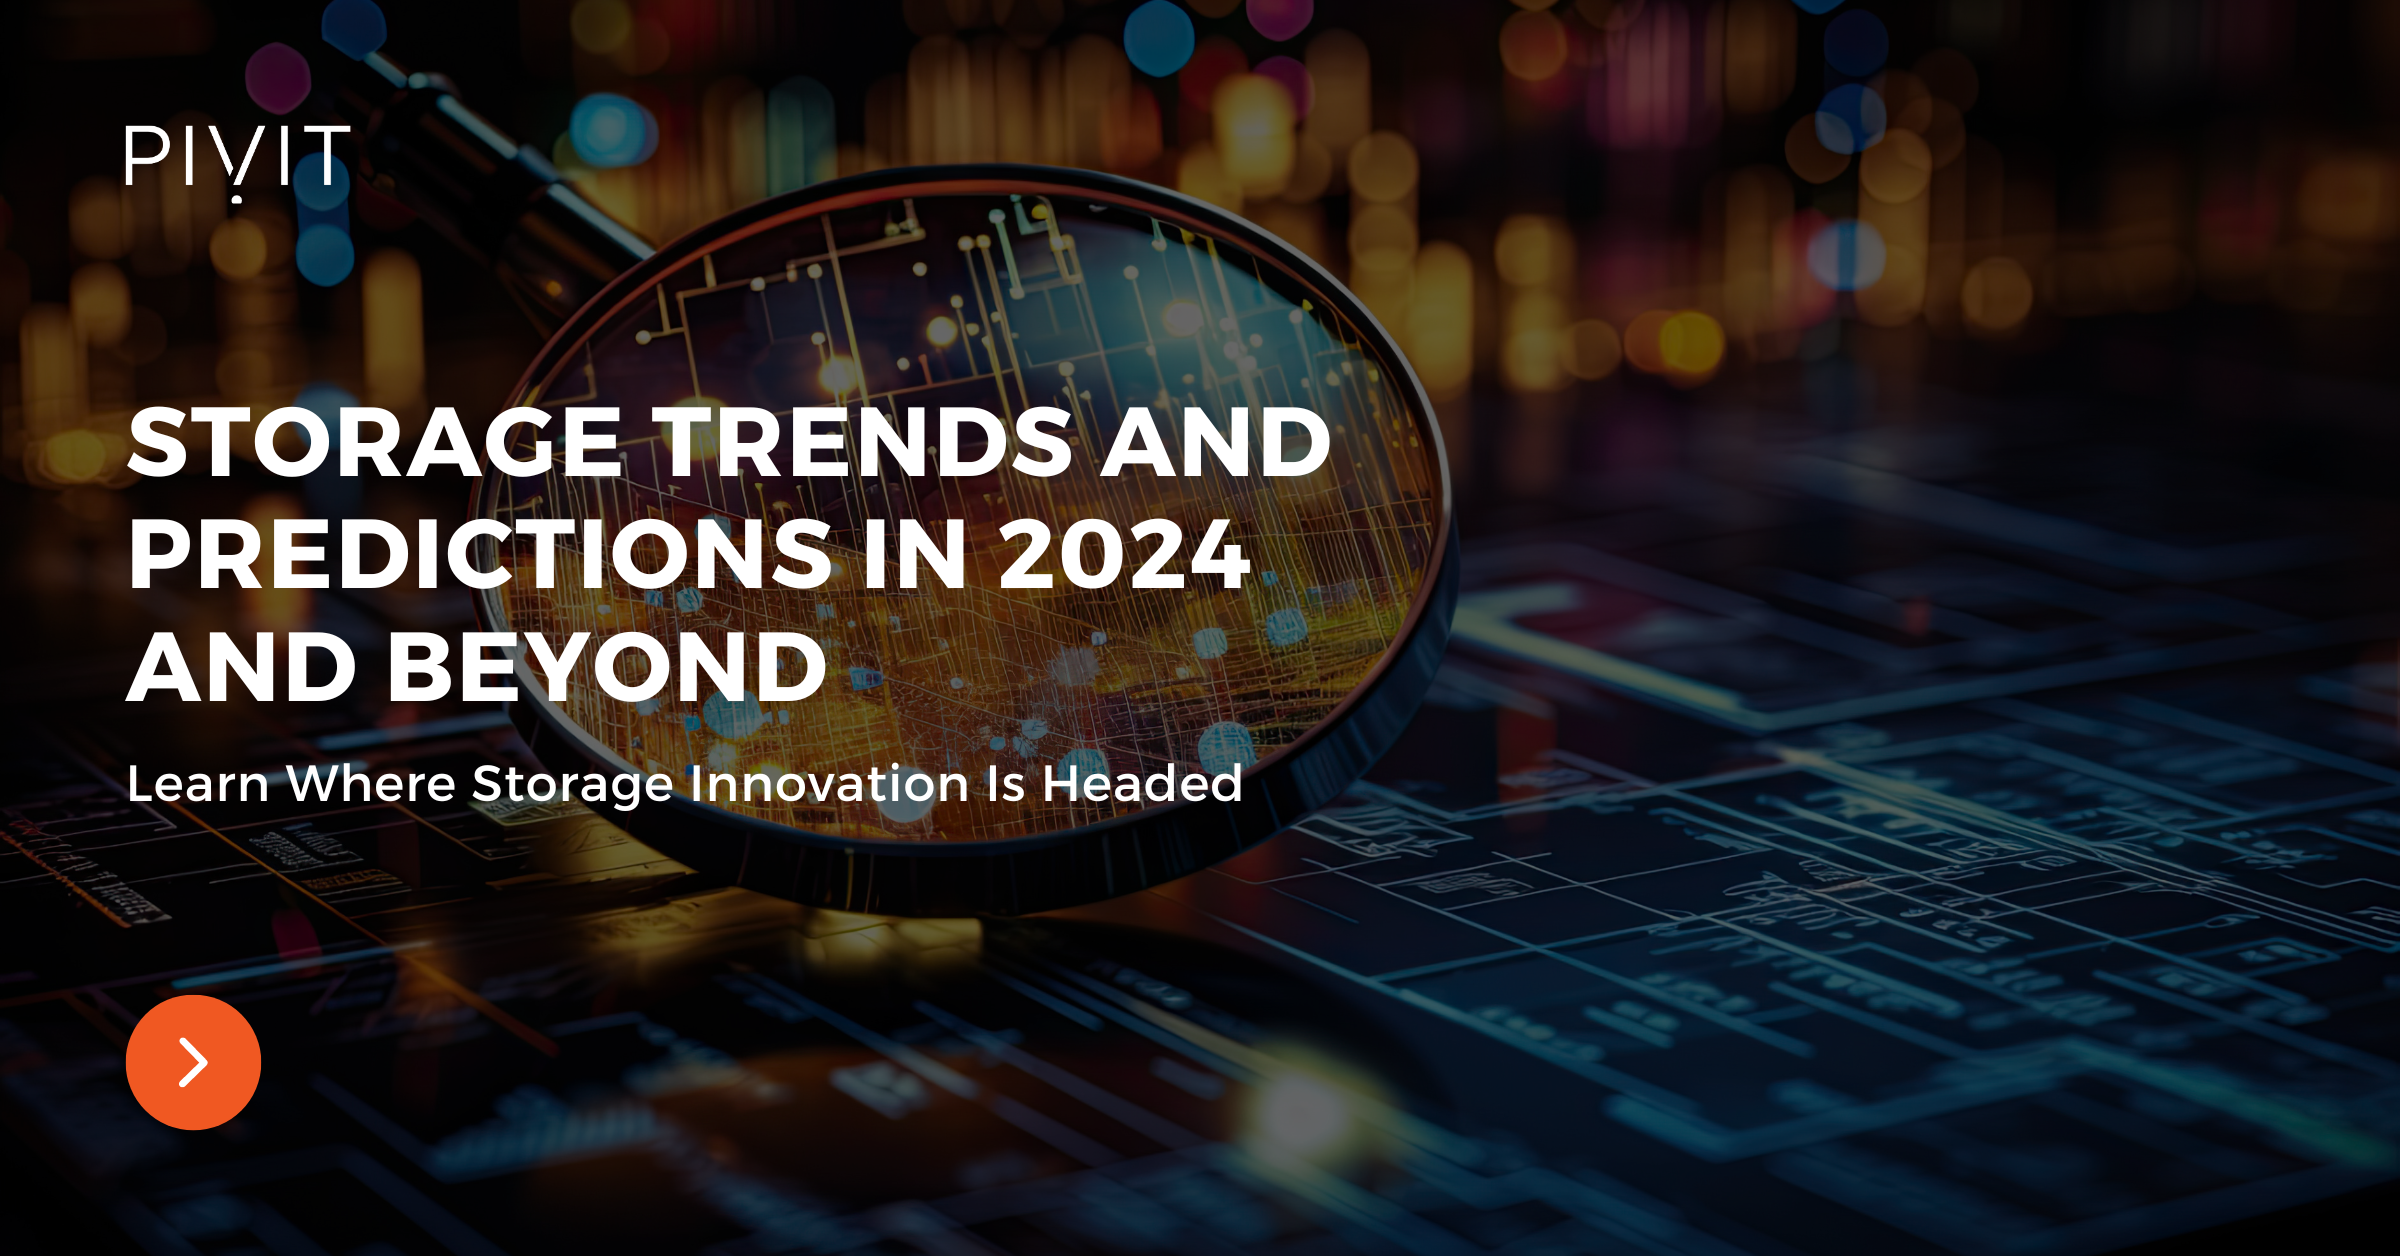 Storage Trends and Predictions in 2024 and Beyond - Learn Where Storage Innovation Is Headed